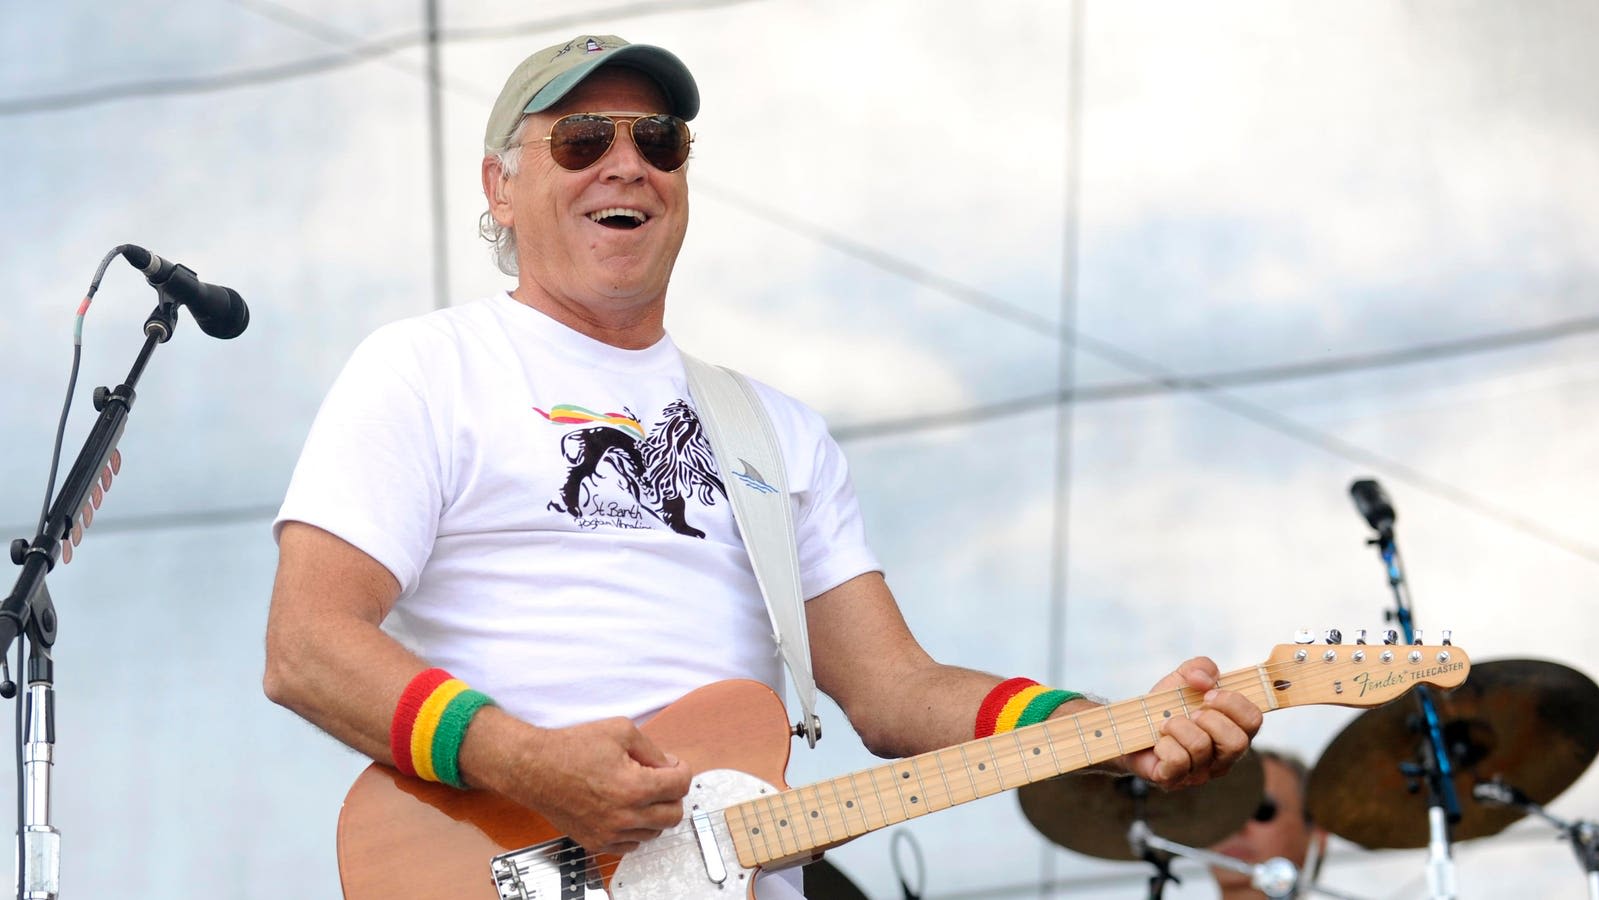 Jimmy Buffett Makes The Rock And Roll Hall Of Fame Despite Not Being Nominated